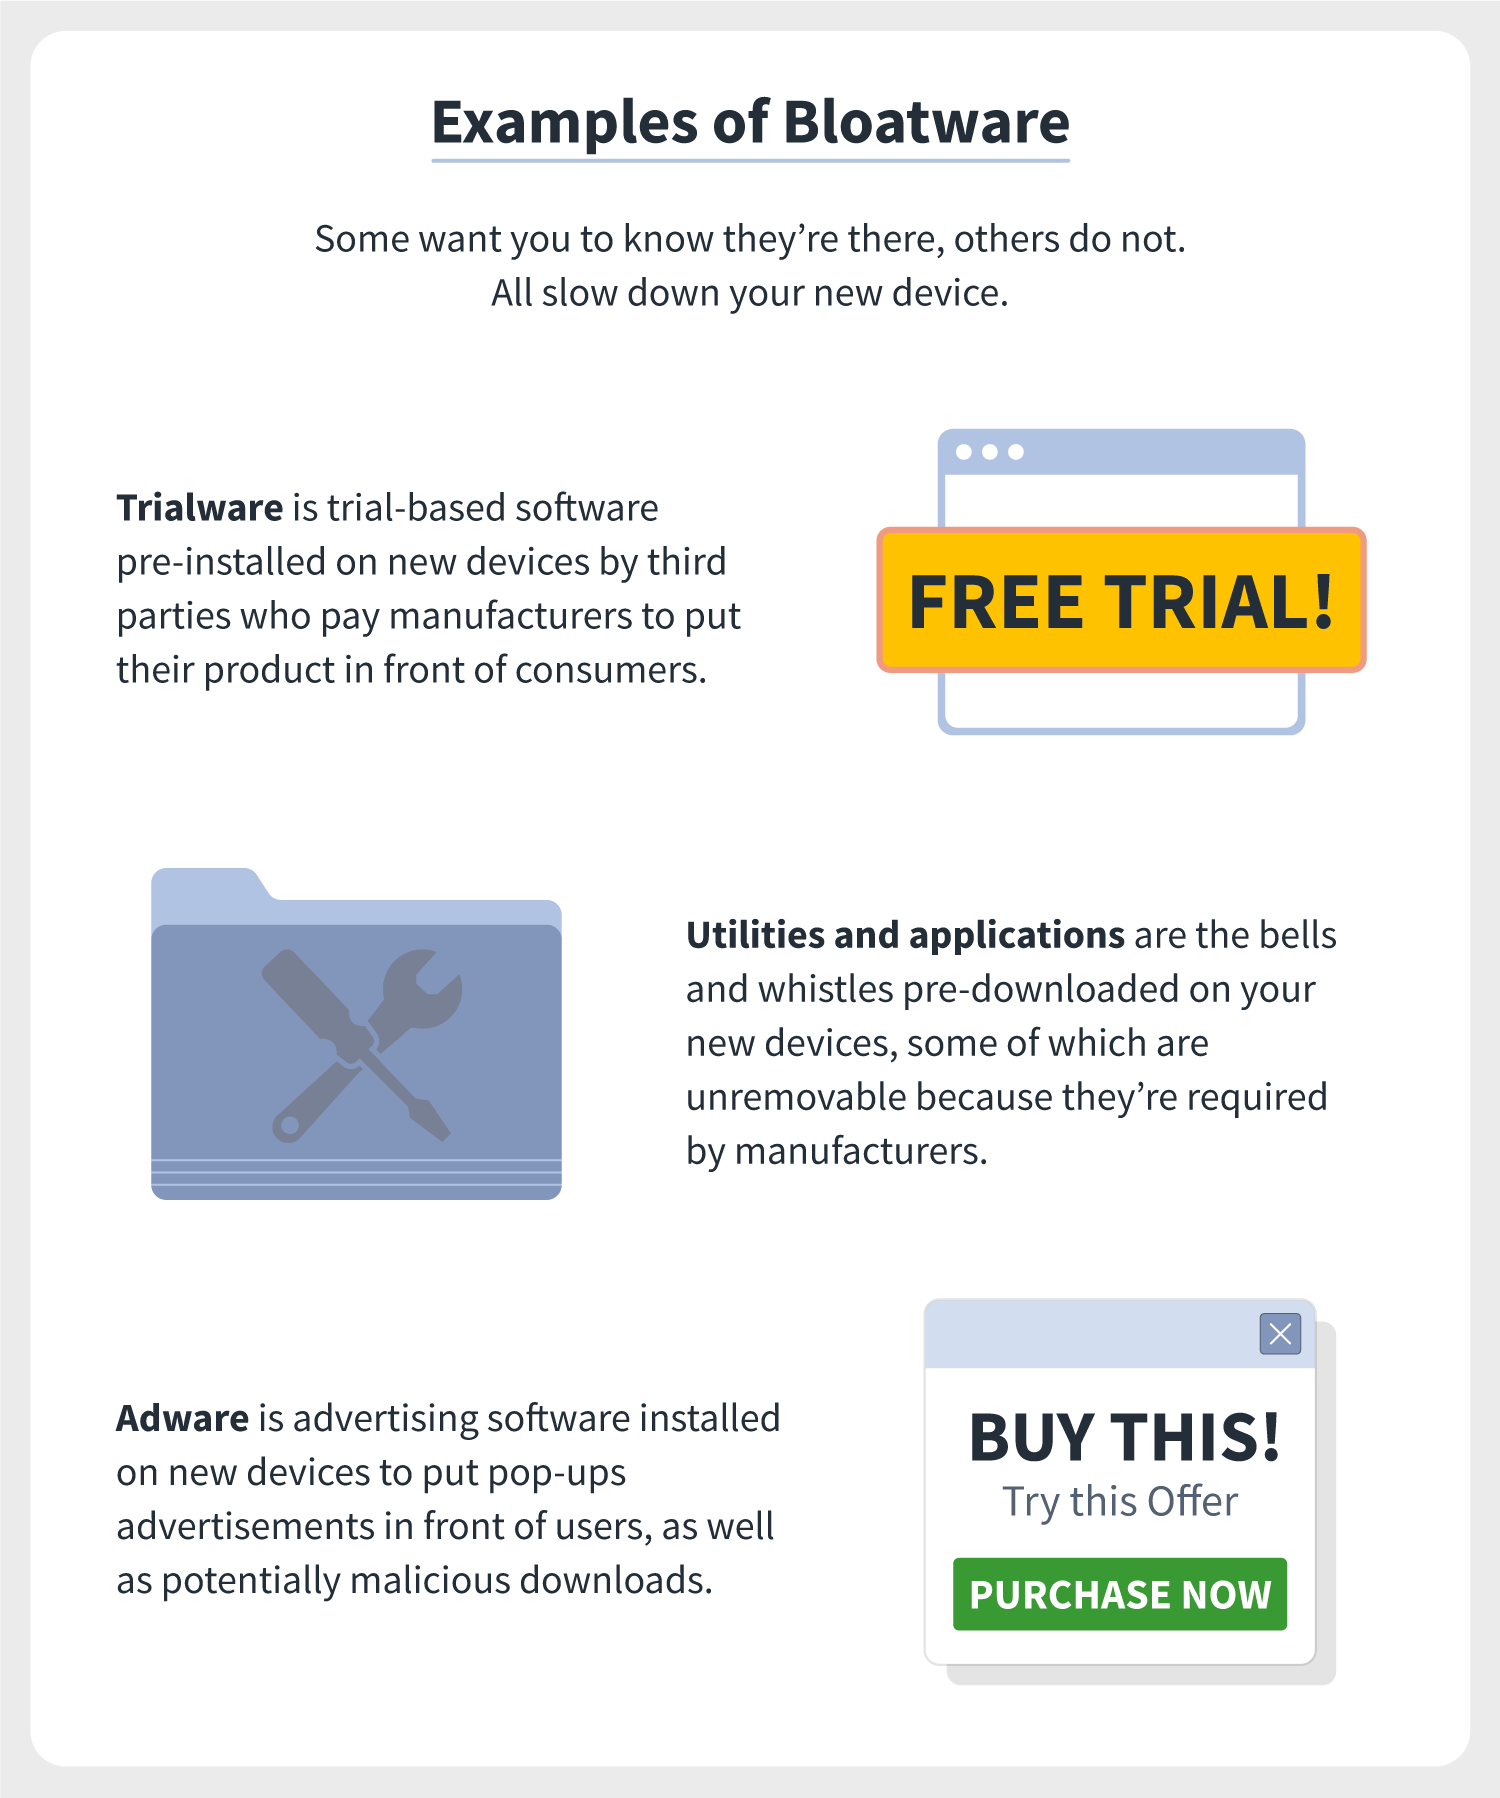 an overview of three examples of bloatware, including trialware, utilities and applications, and also adware